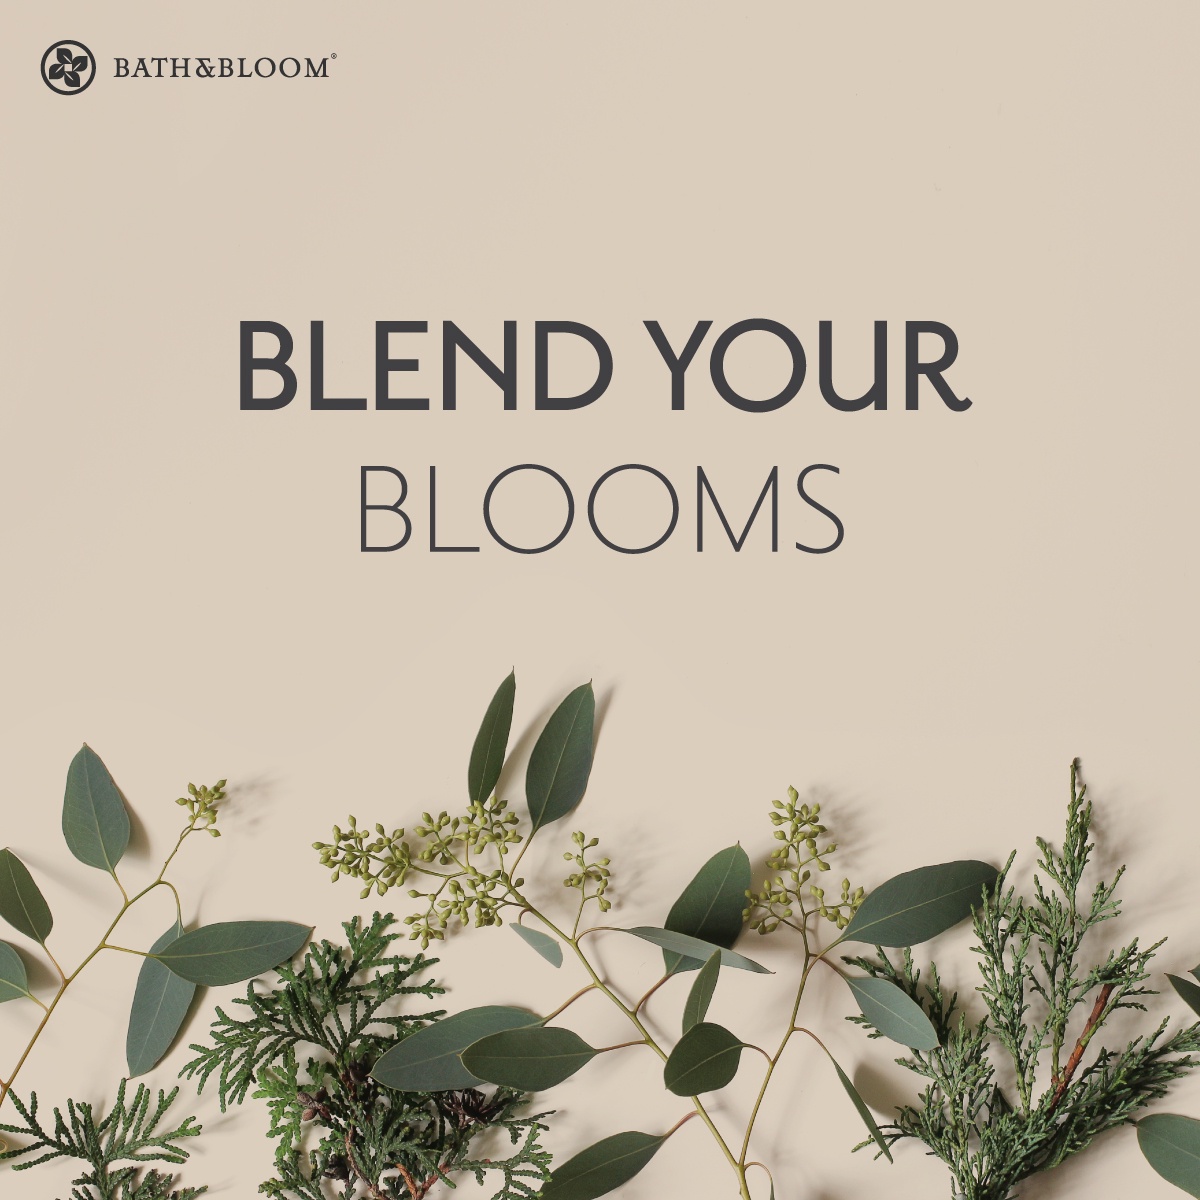 Blend your Blooms